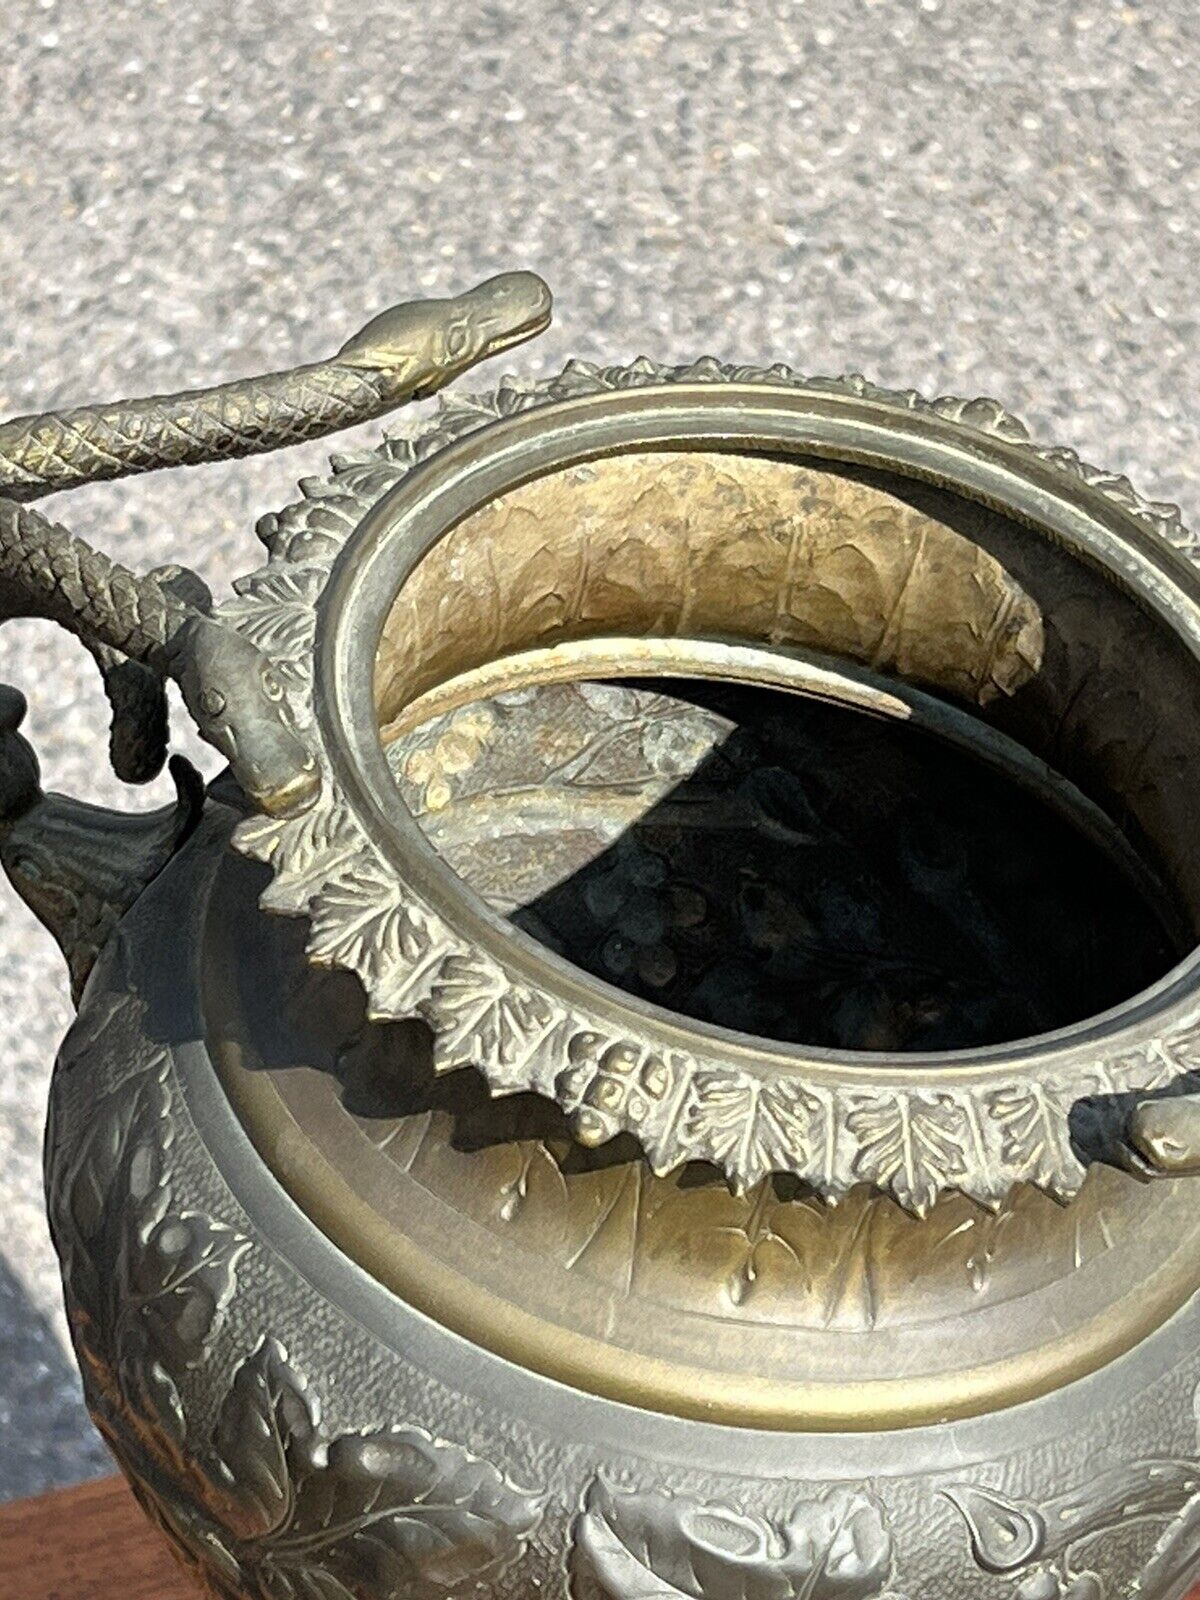 Large Victorian Urn Decorated With Vine Leaves & Grapes With Snake Handles.